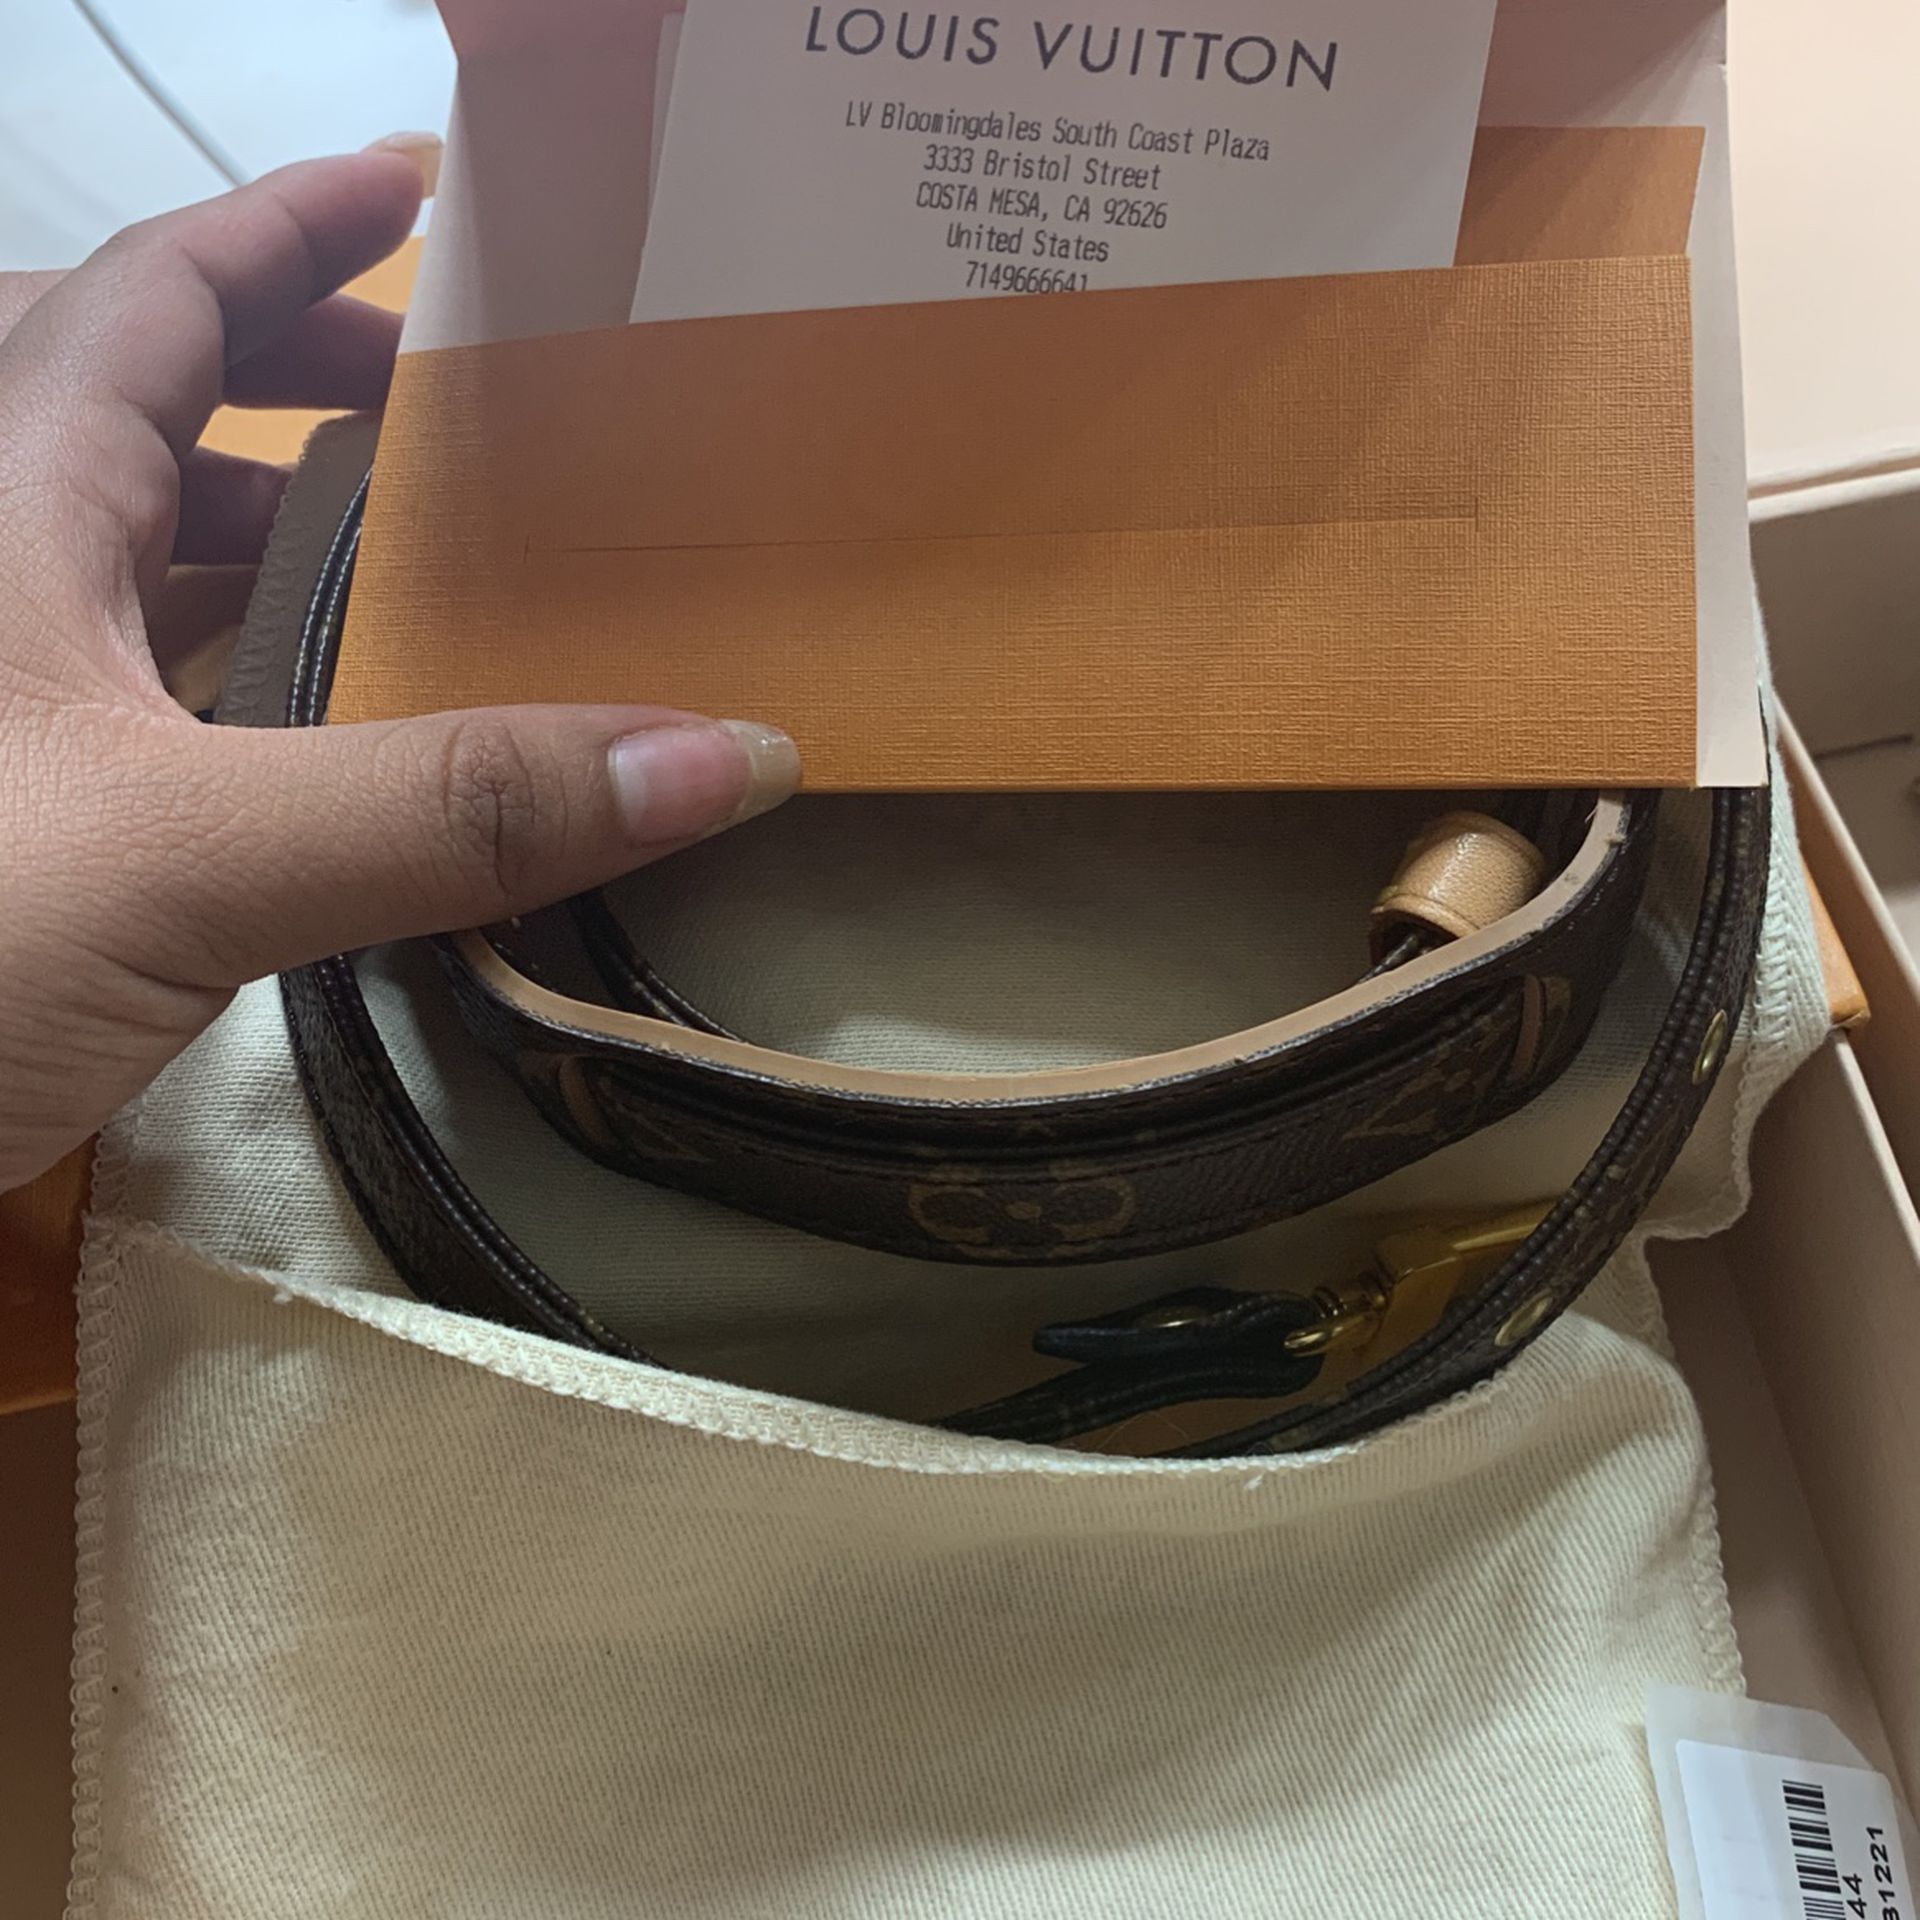 Louis Vuitton Authentic With Receipts And Bags And Dust Bag And Box